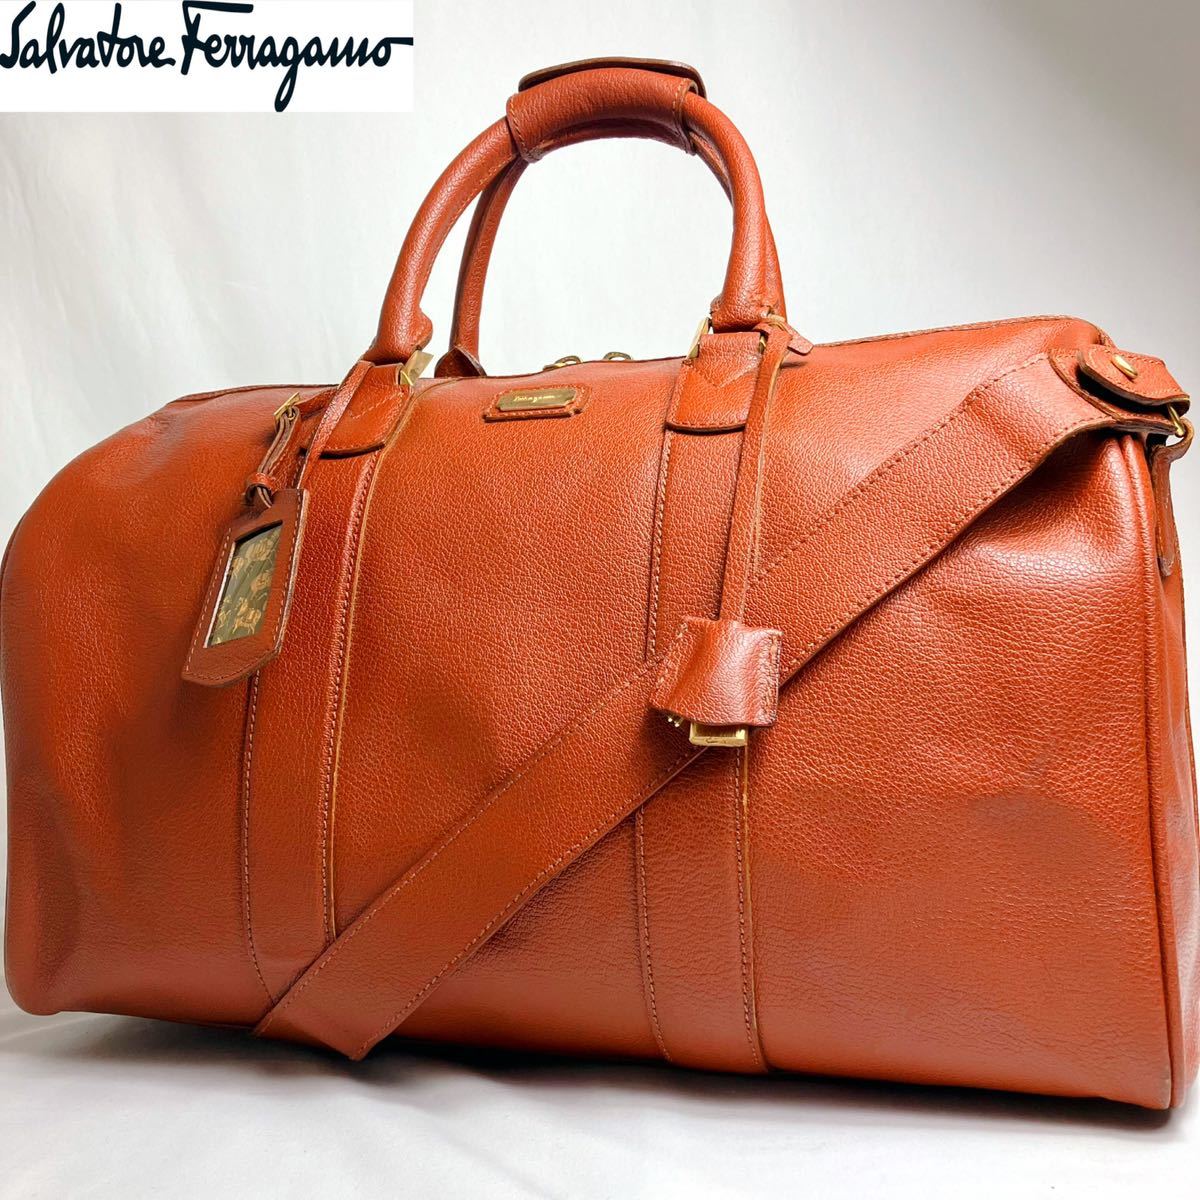 Purses, bags - Salvatore Ferragamo - (Japanese name) Starts with